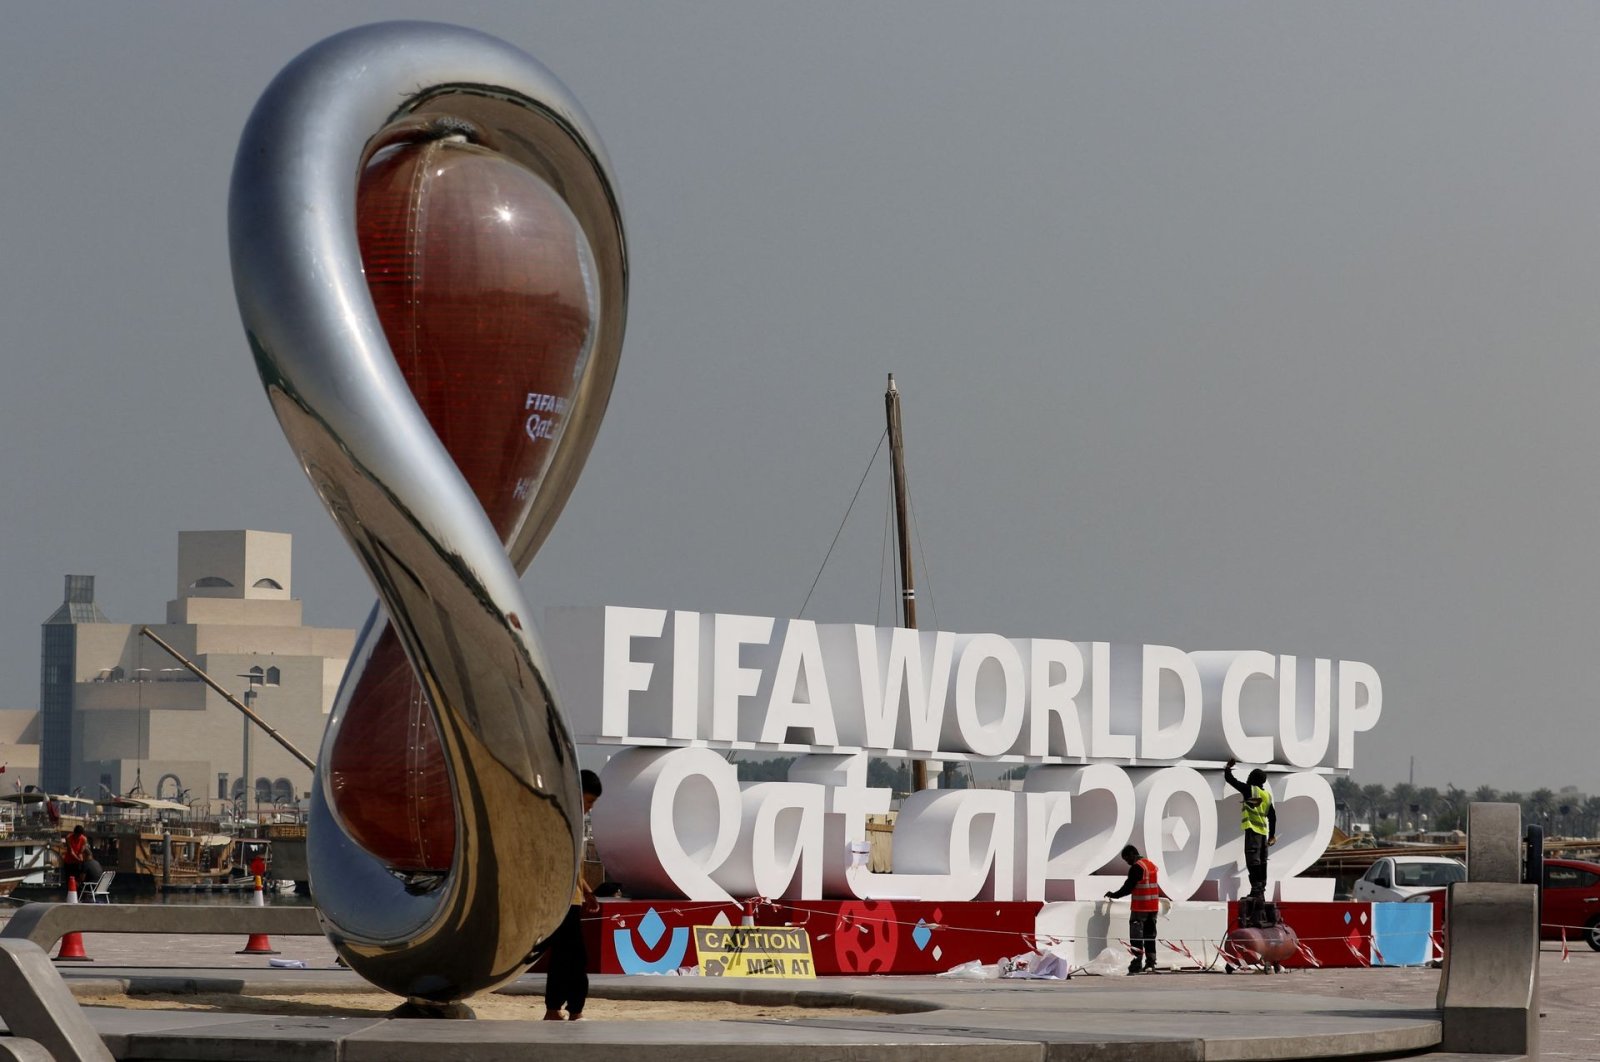 General view as people pose for a picture ahead of the FIFA World Cup, Doha, Qatar, Oct. 26, 2022. (Reuters Photo)